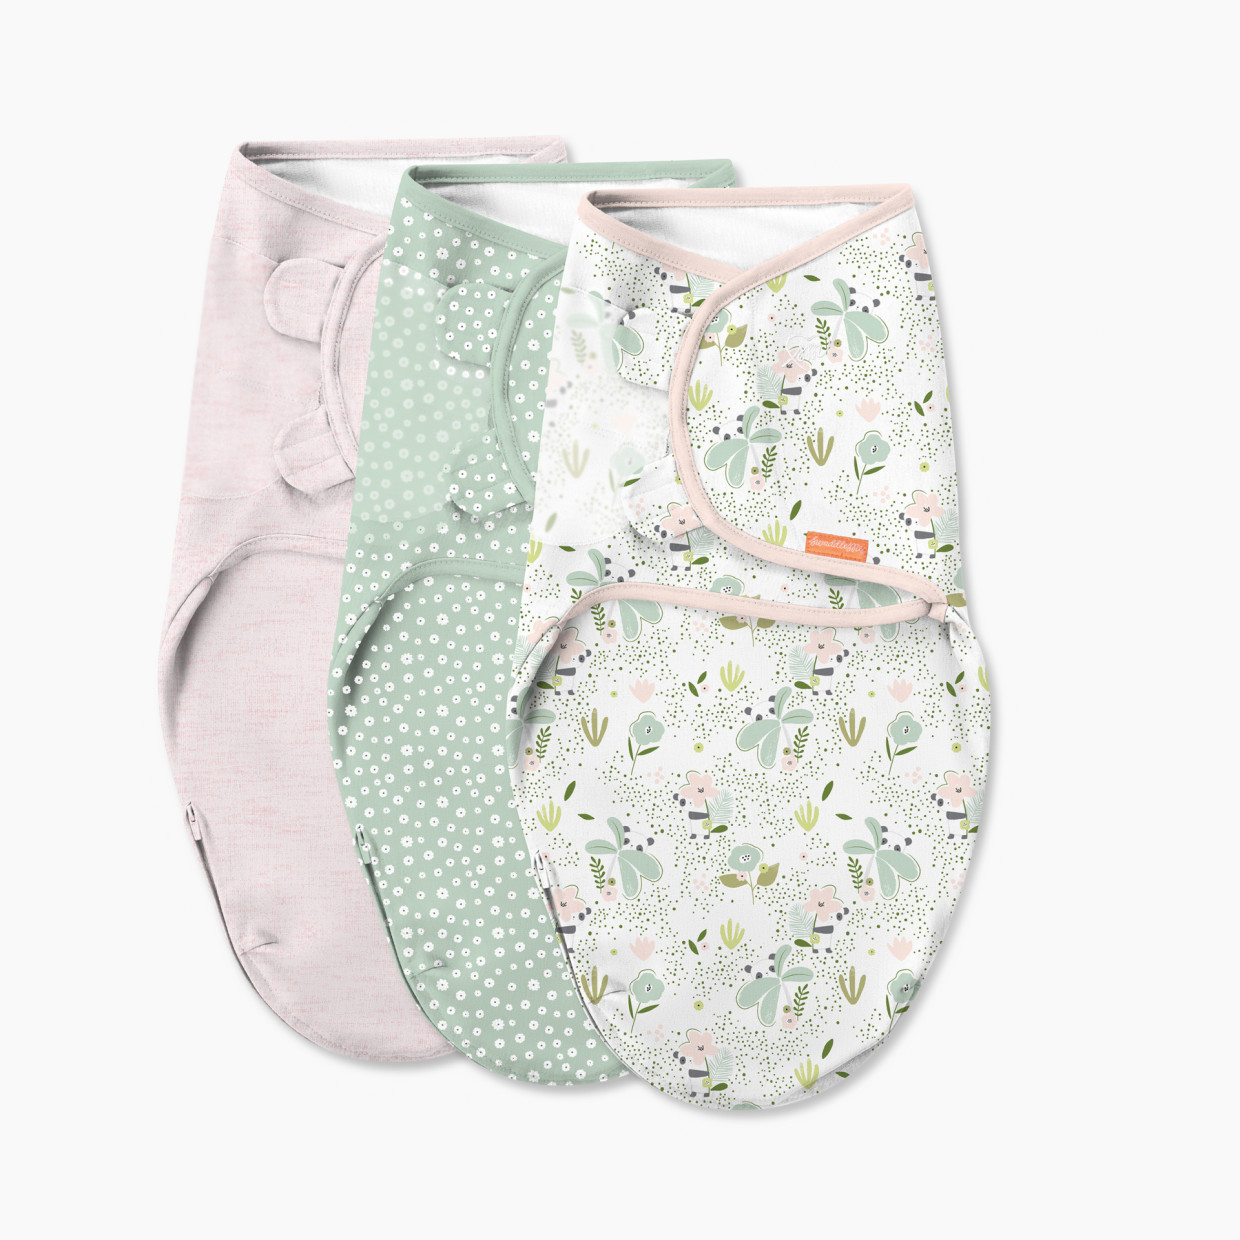 Summer Infant Easy Change (3-Pack ) - Peek Aboo Pands, S/M.